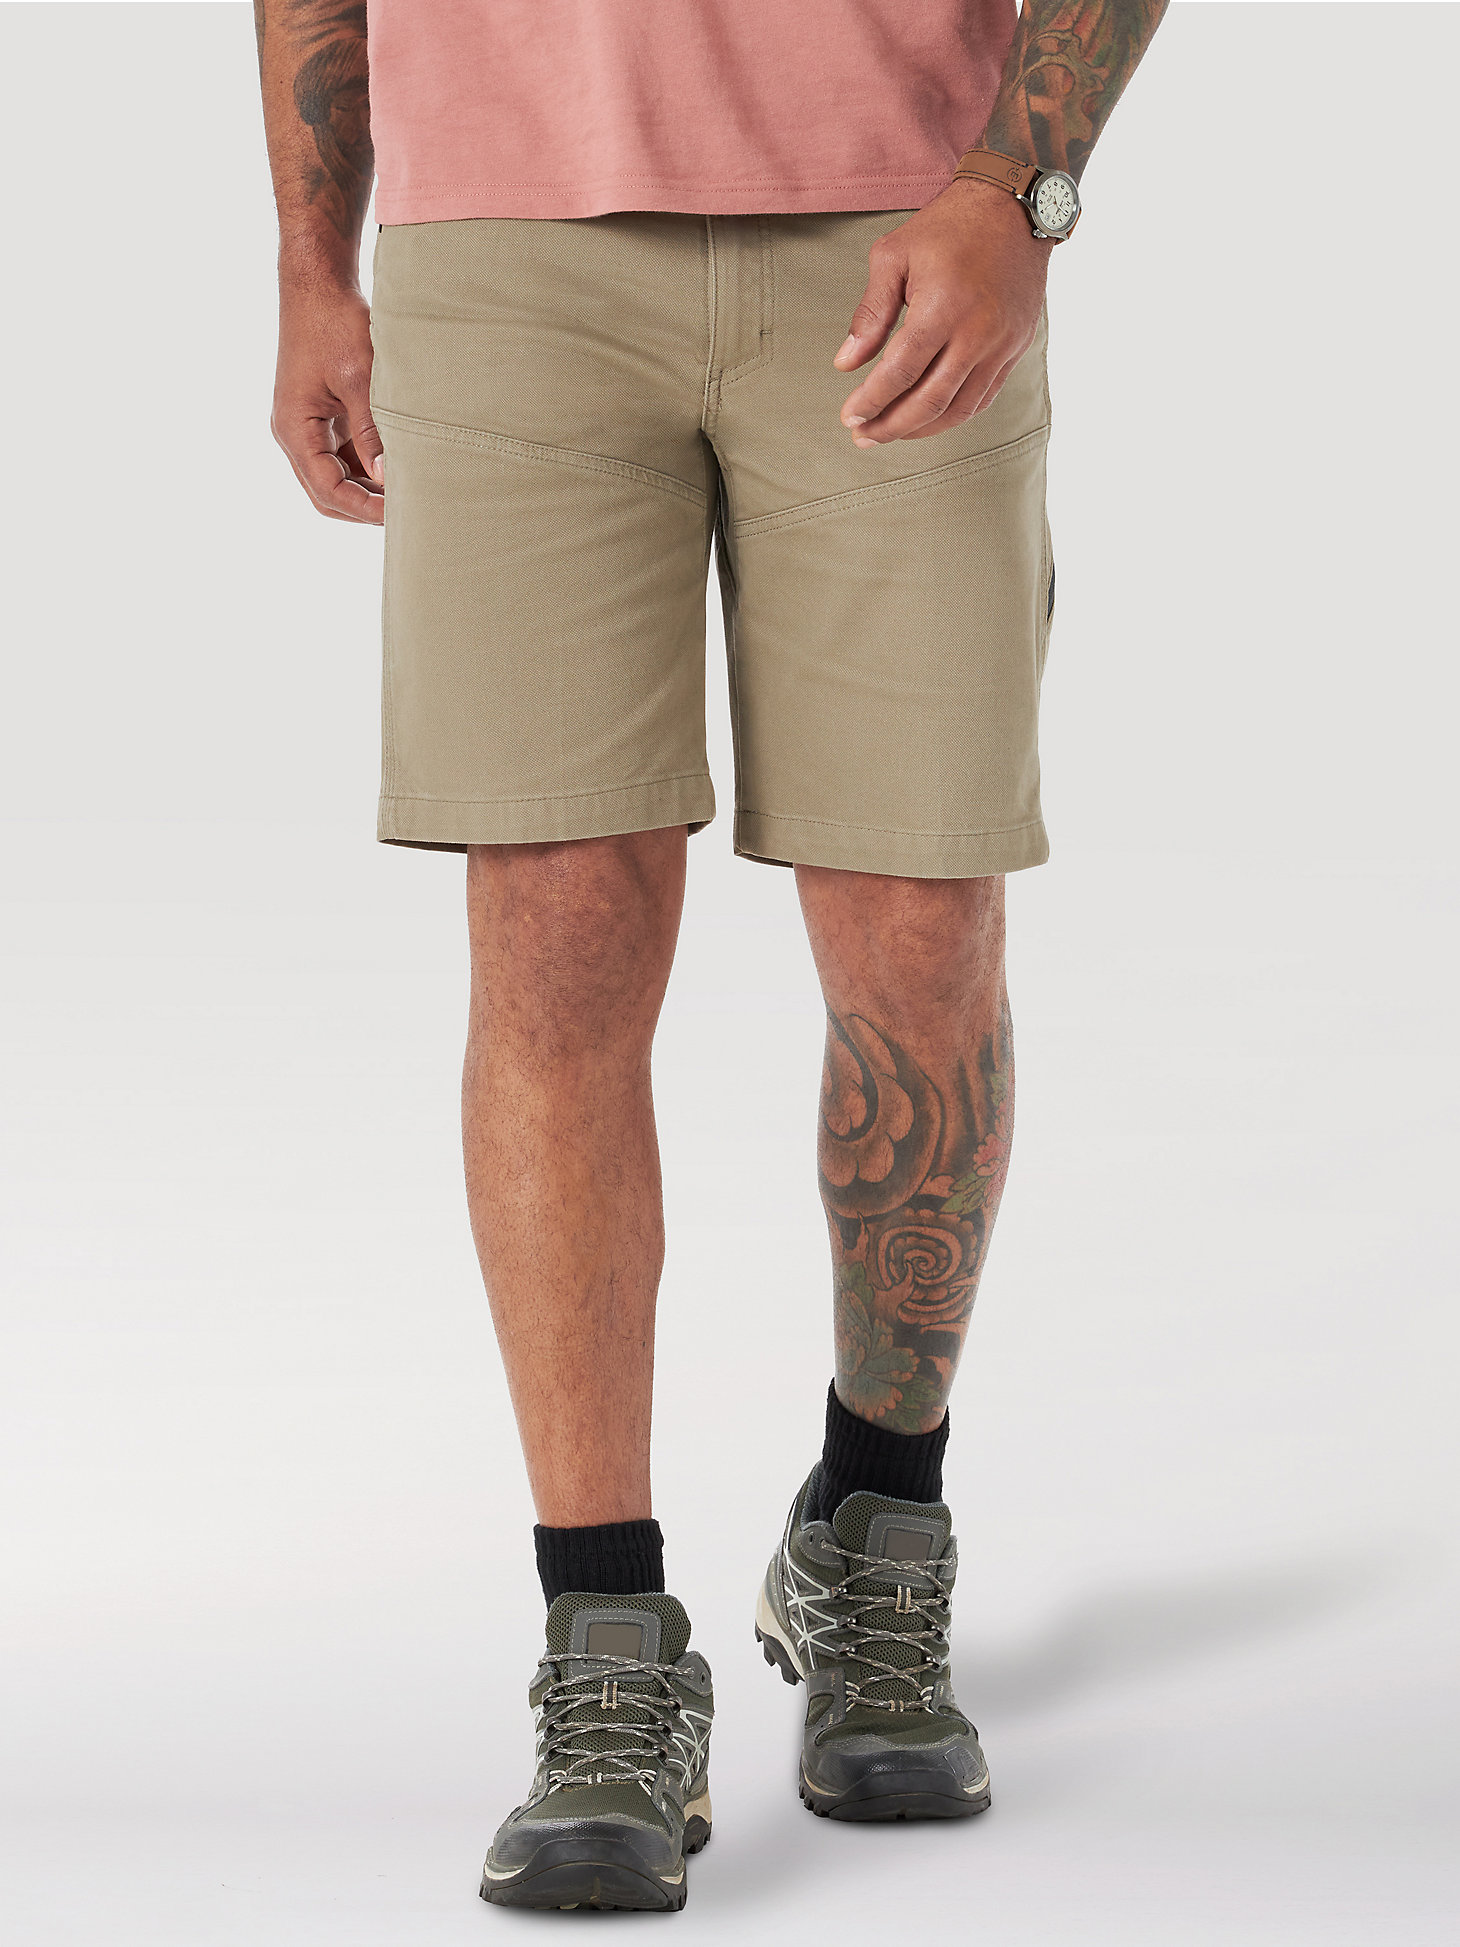 ATG by Wrangler™ Men's Reinforced Utility Short in Brindle main view